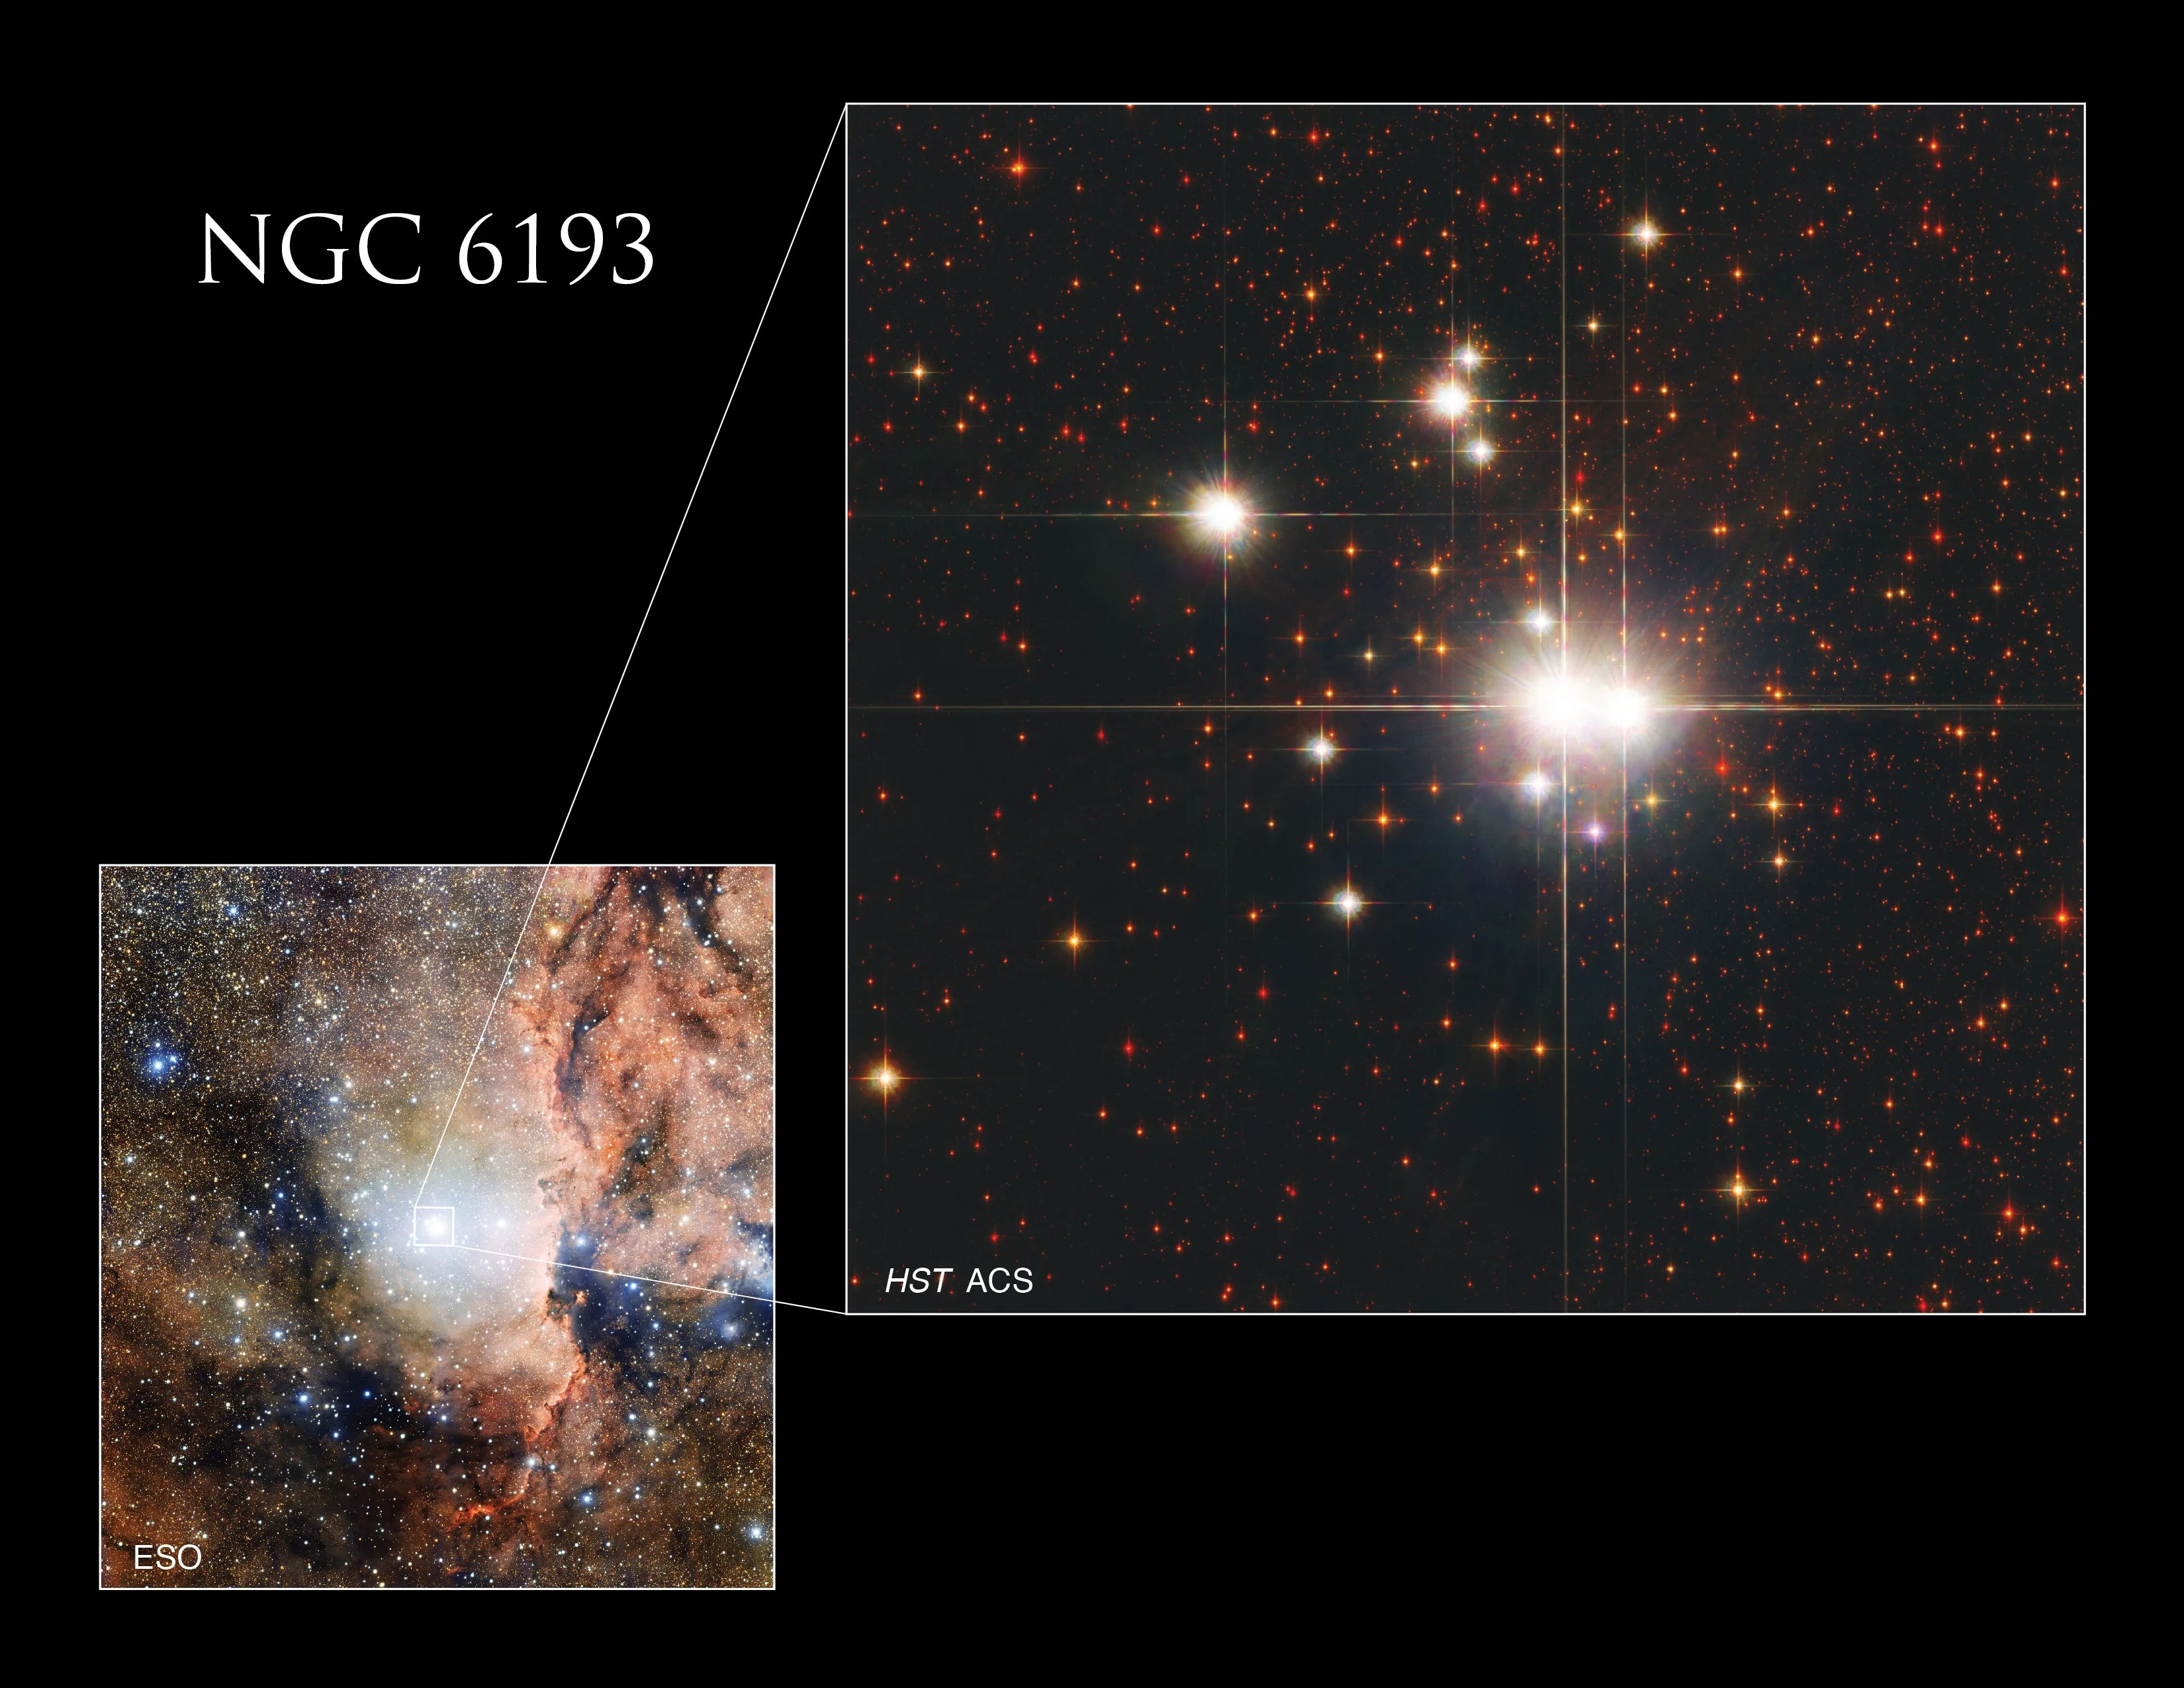 This image provides context for Hubble’s observation of Caldwell 82 (NGC 6193).